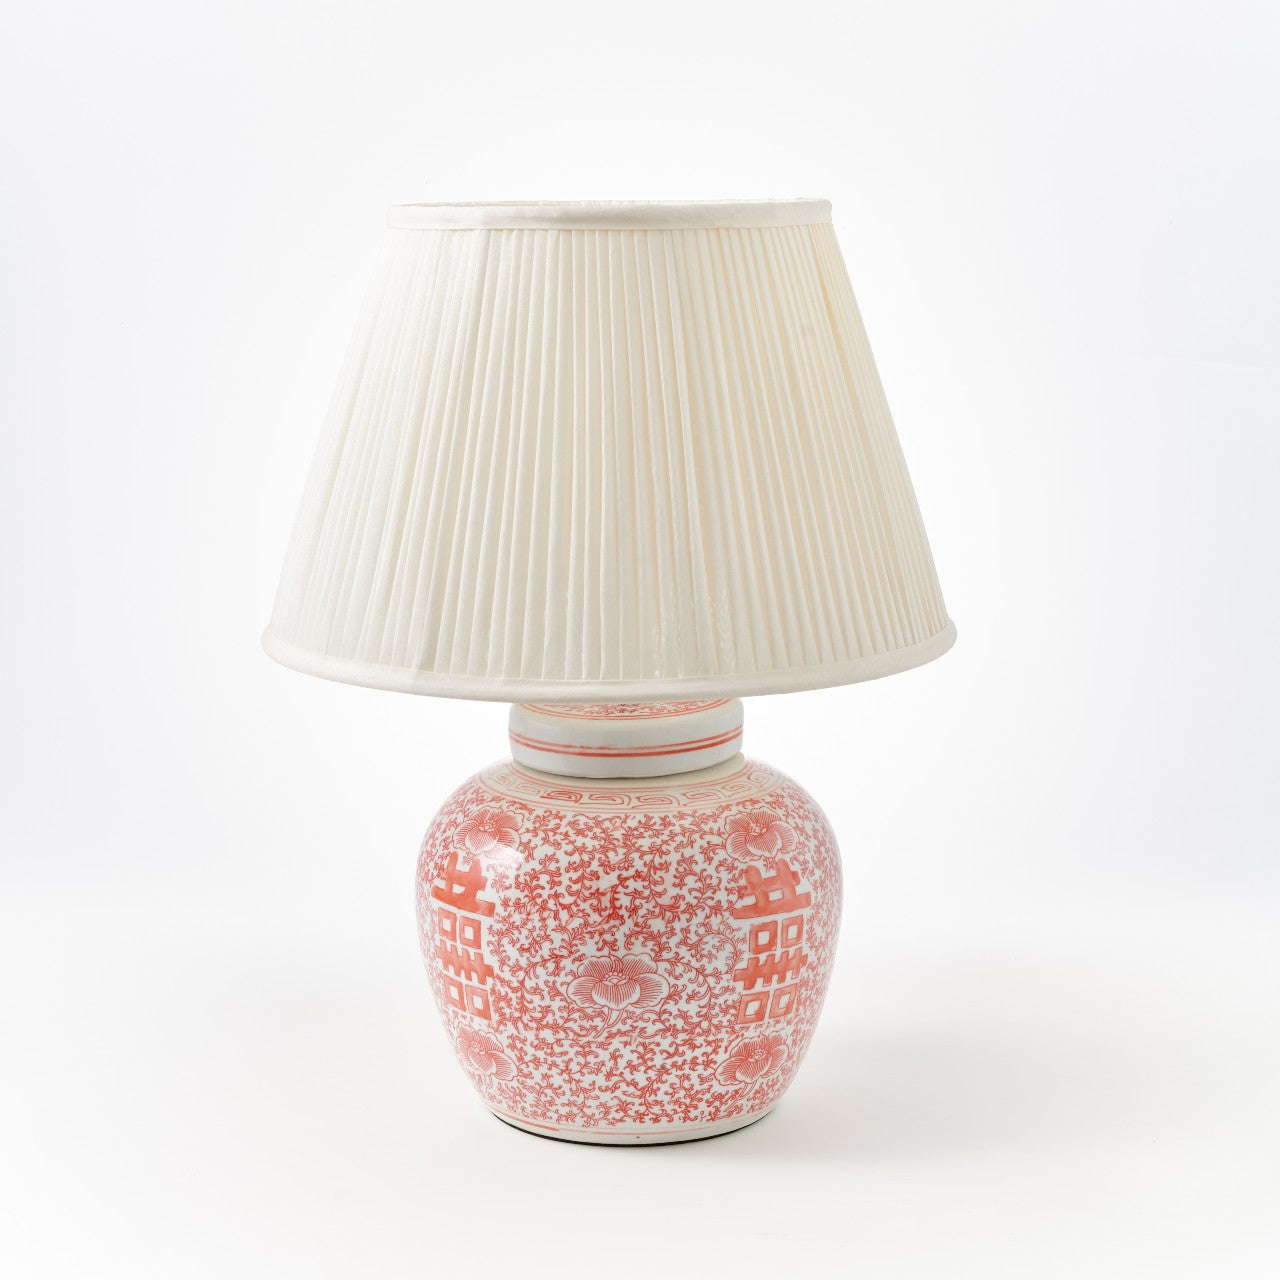 Double Happiness Ceramic Lamp - Coral